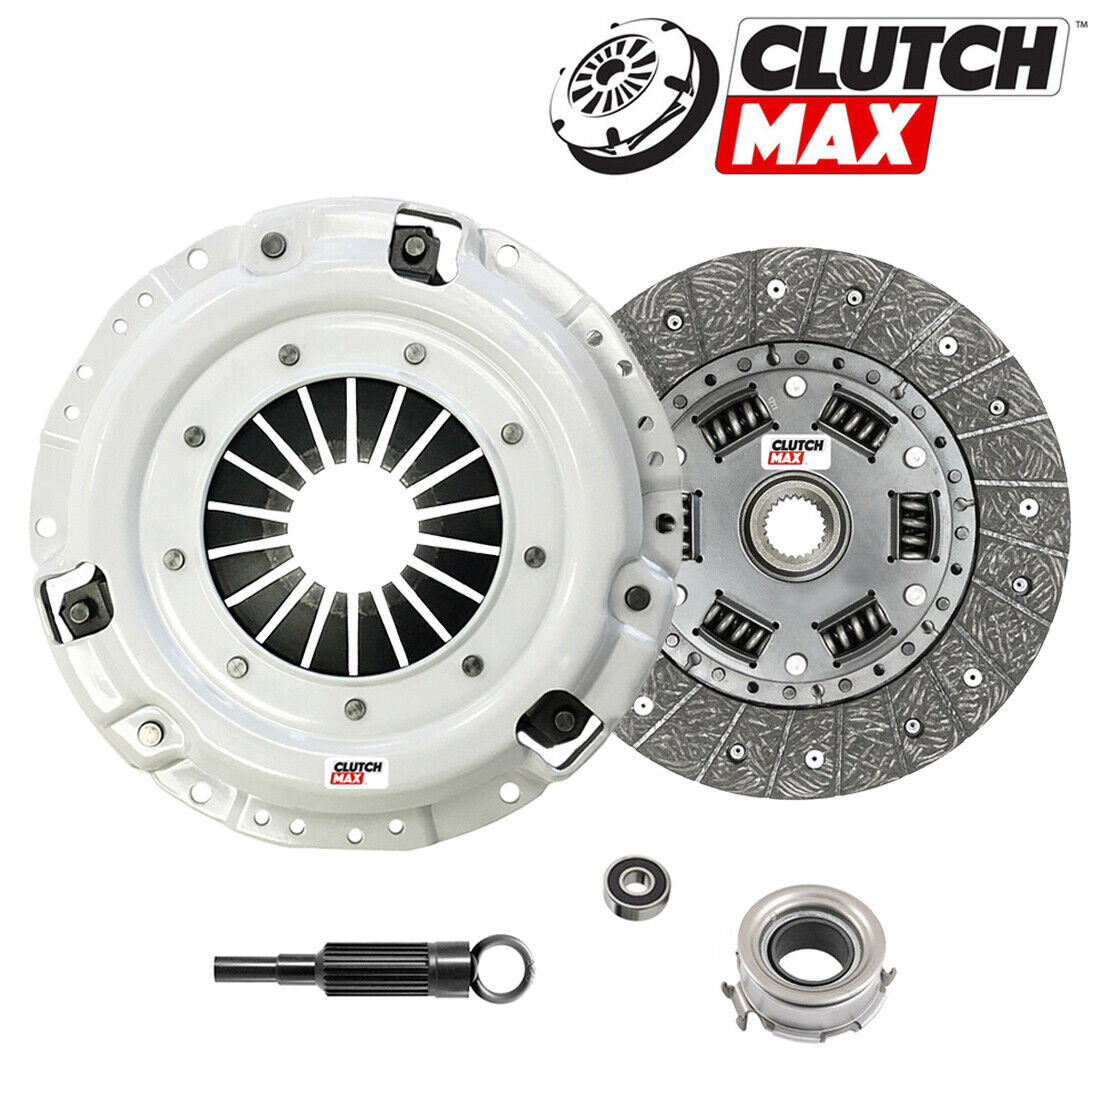 CLUTCHMAX OEM CLUTCH KIT for SUBARU IMPREZA FORESTER LEGACY OUTBACK 2.5L 3.0L NT